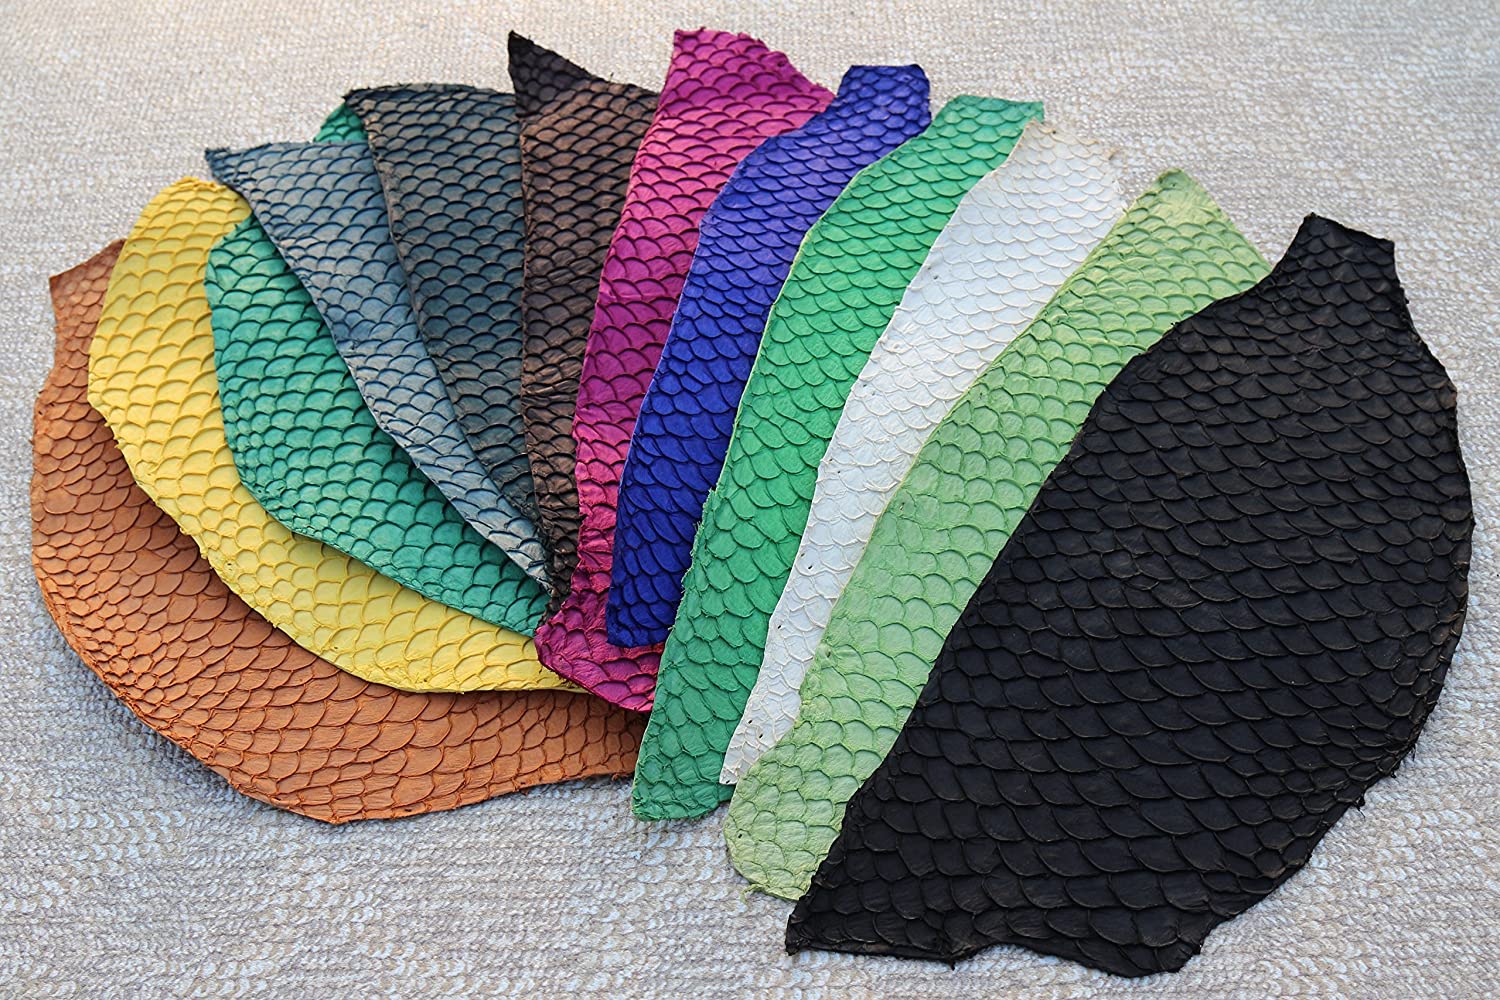 Agribyte: Making exotic fish leather from waste skins